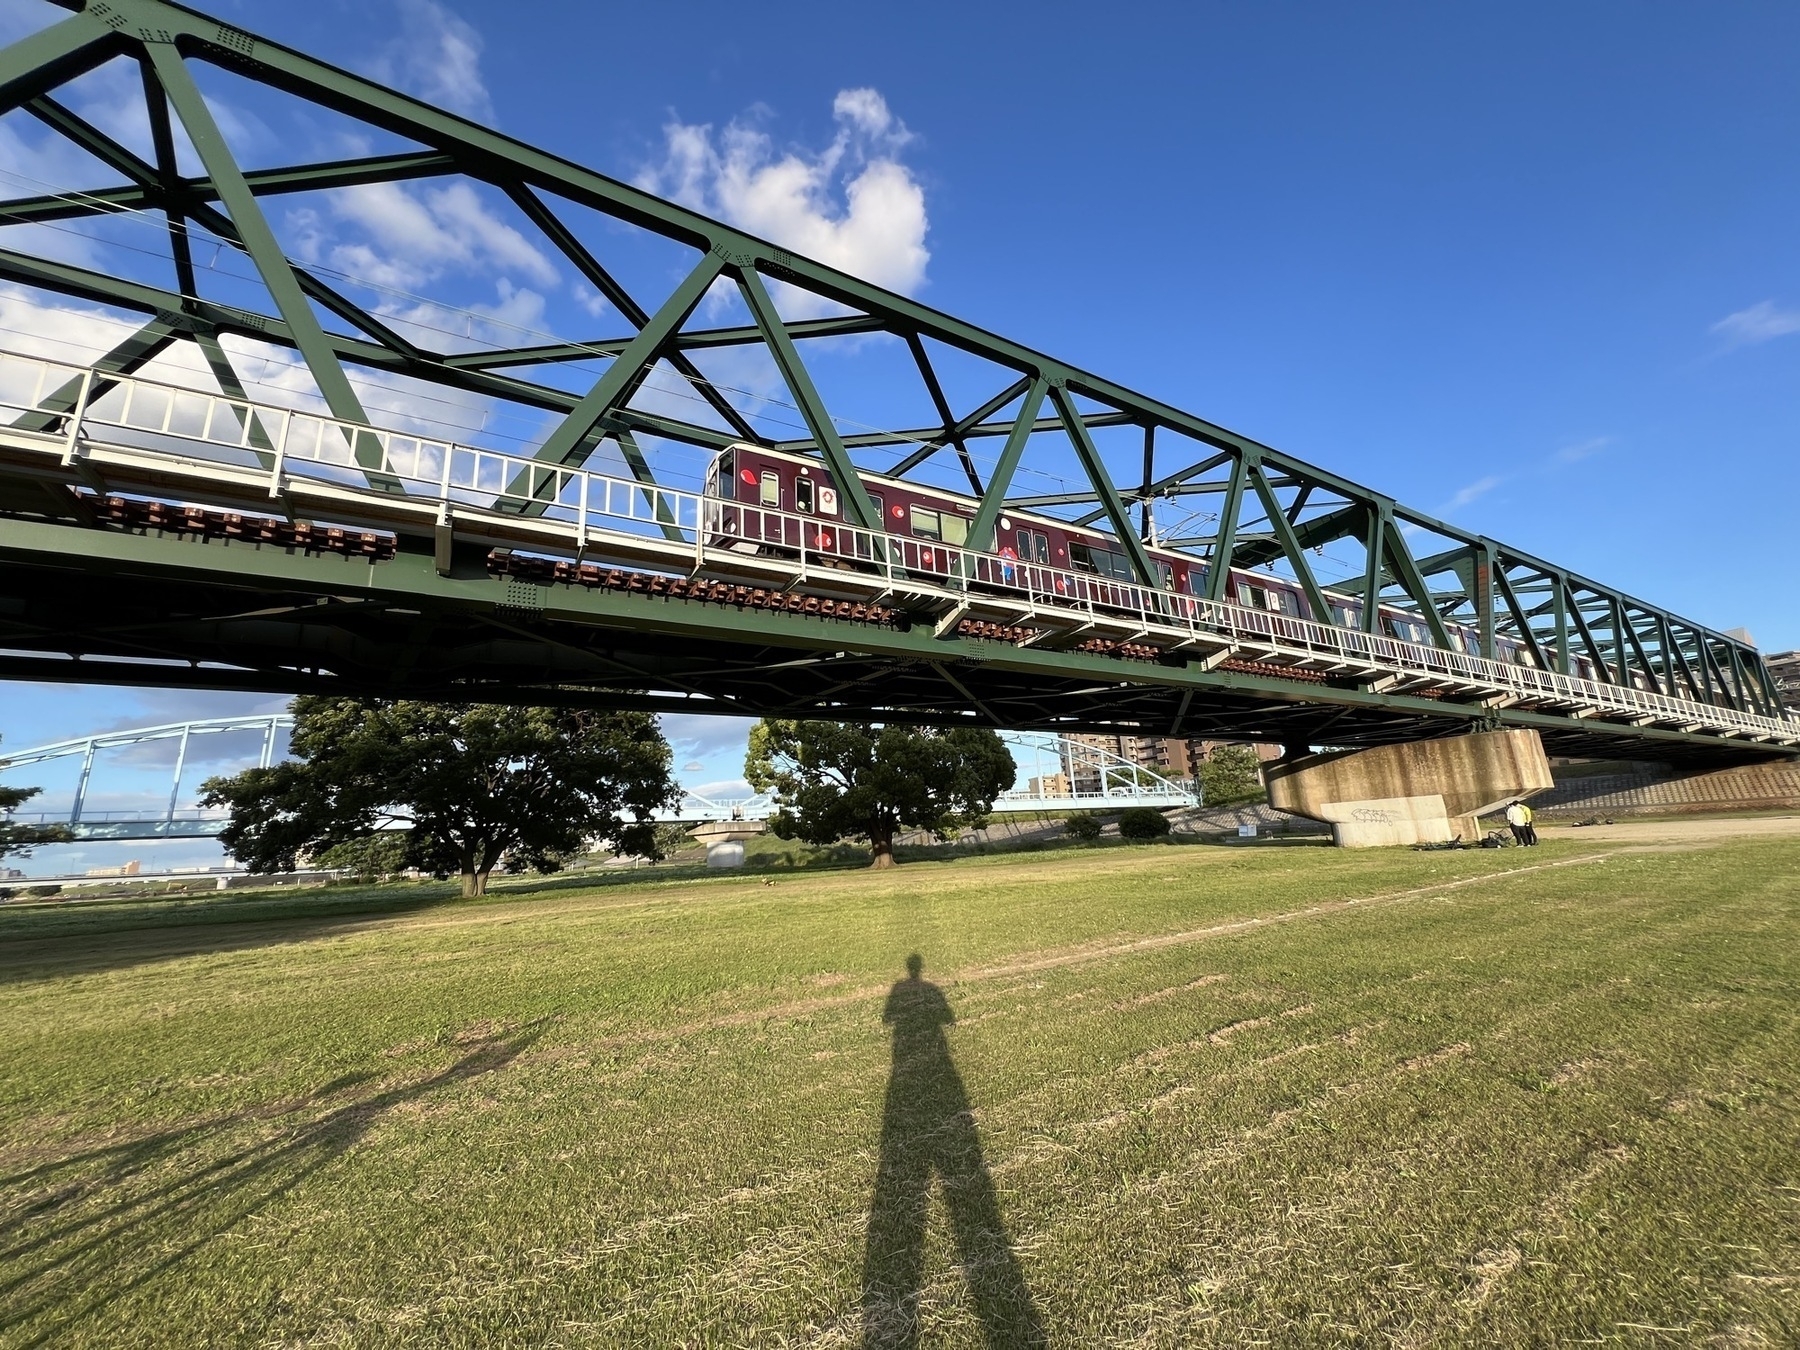 train with Myaku Myaku, the 2025 Osaka Expo mascot, passes over head on a tran bridge. Chad takes a photo from a grassy field below. The scene is lit by a low sun from behind, casting Chad (and his bike's) shadow across the grass